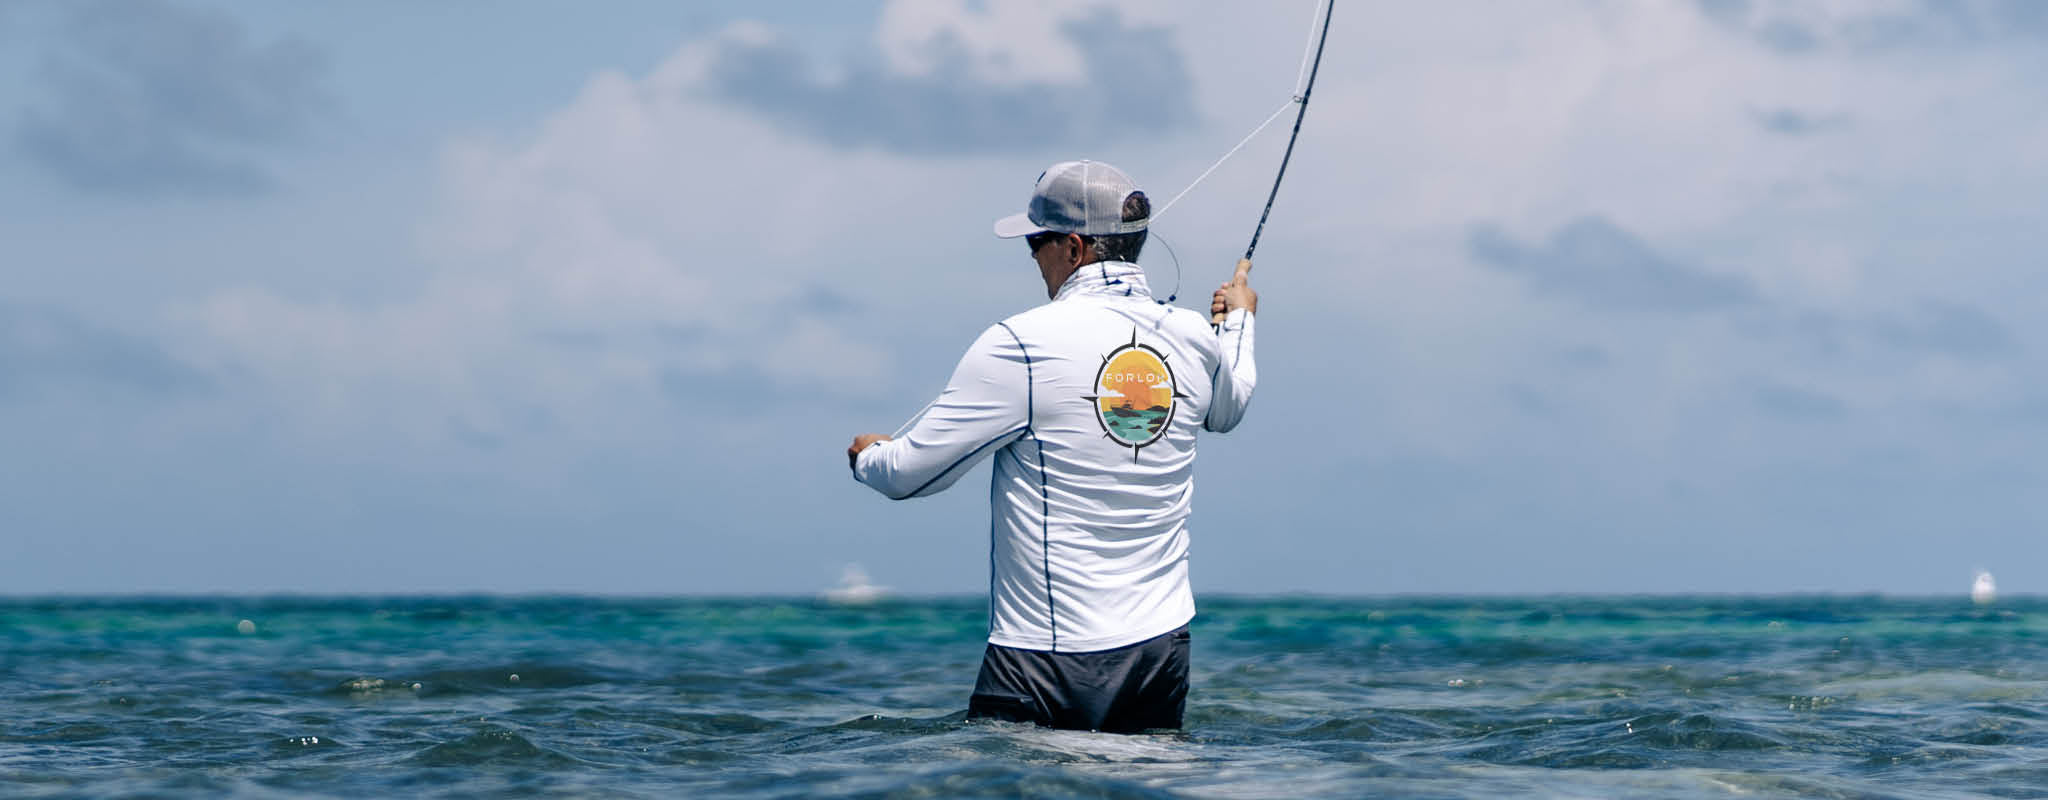 Fishing Apparel & Gear: The Angler's Collection